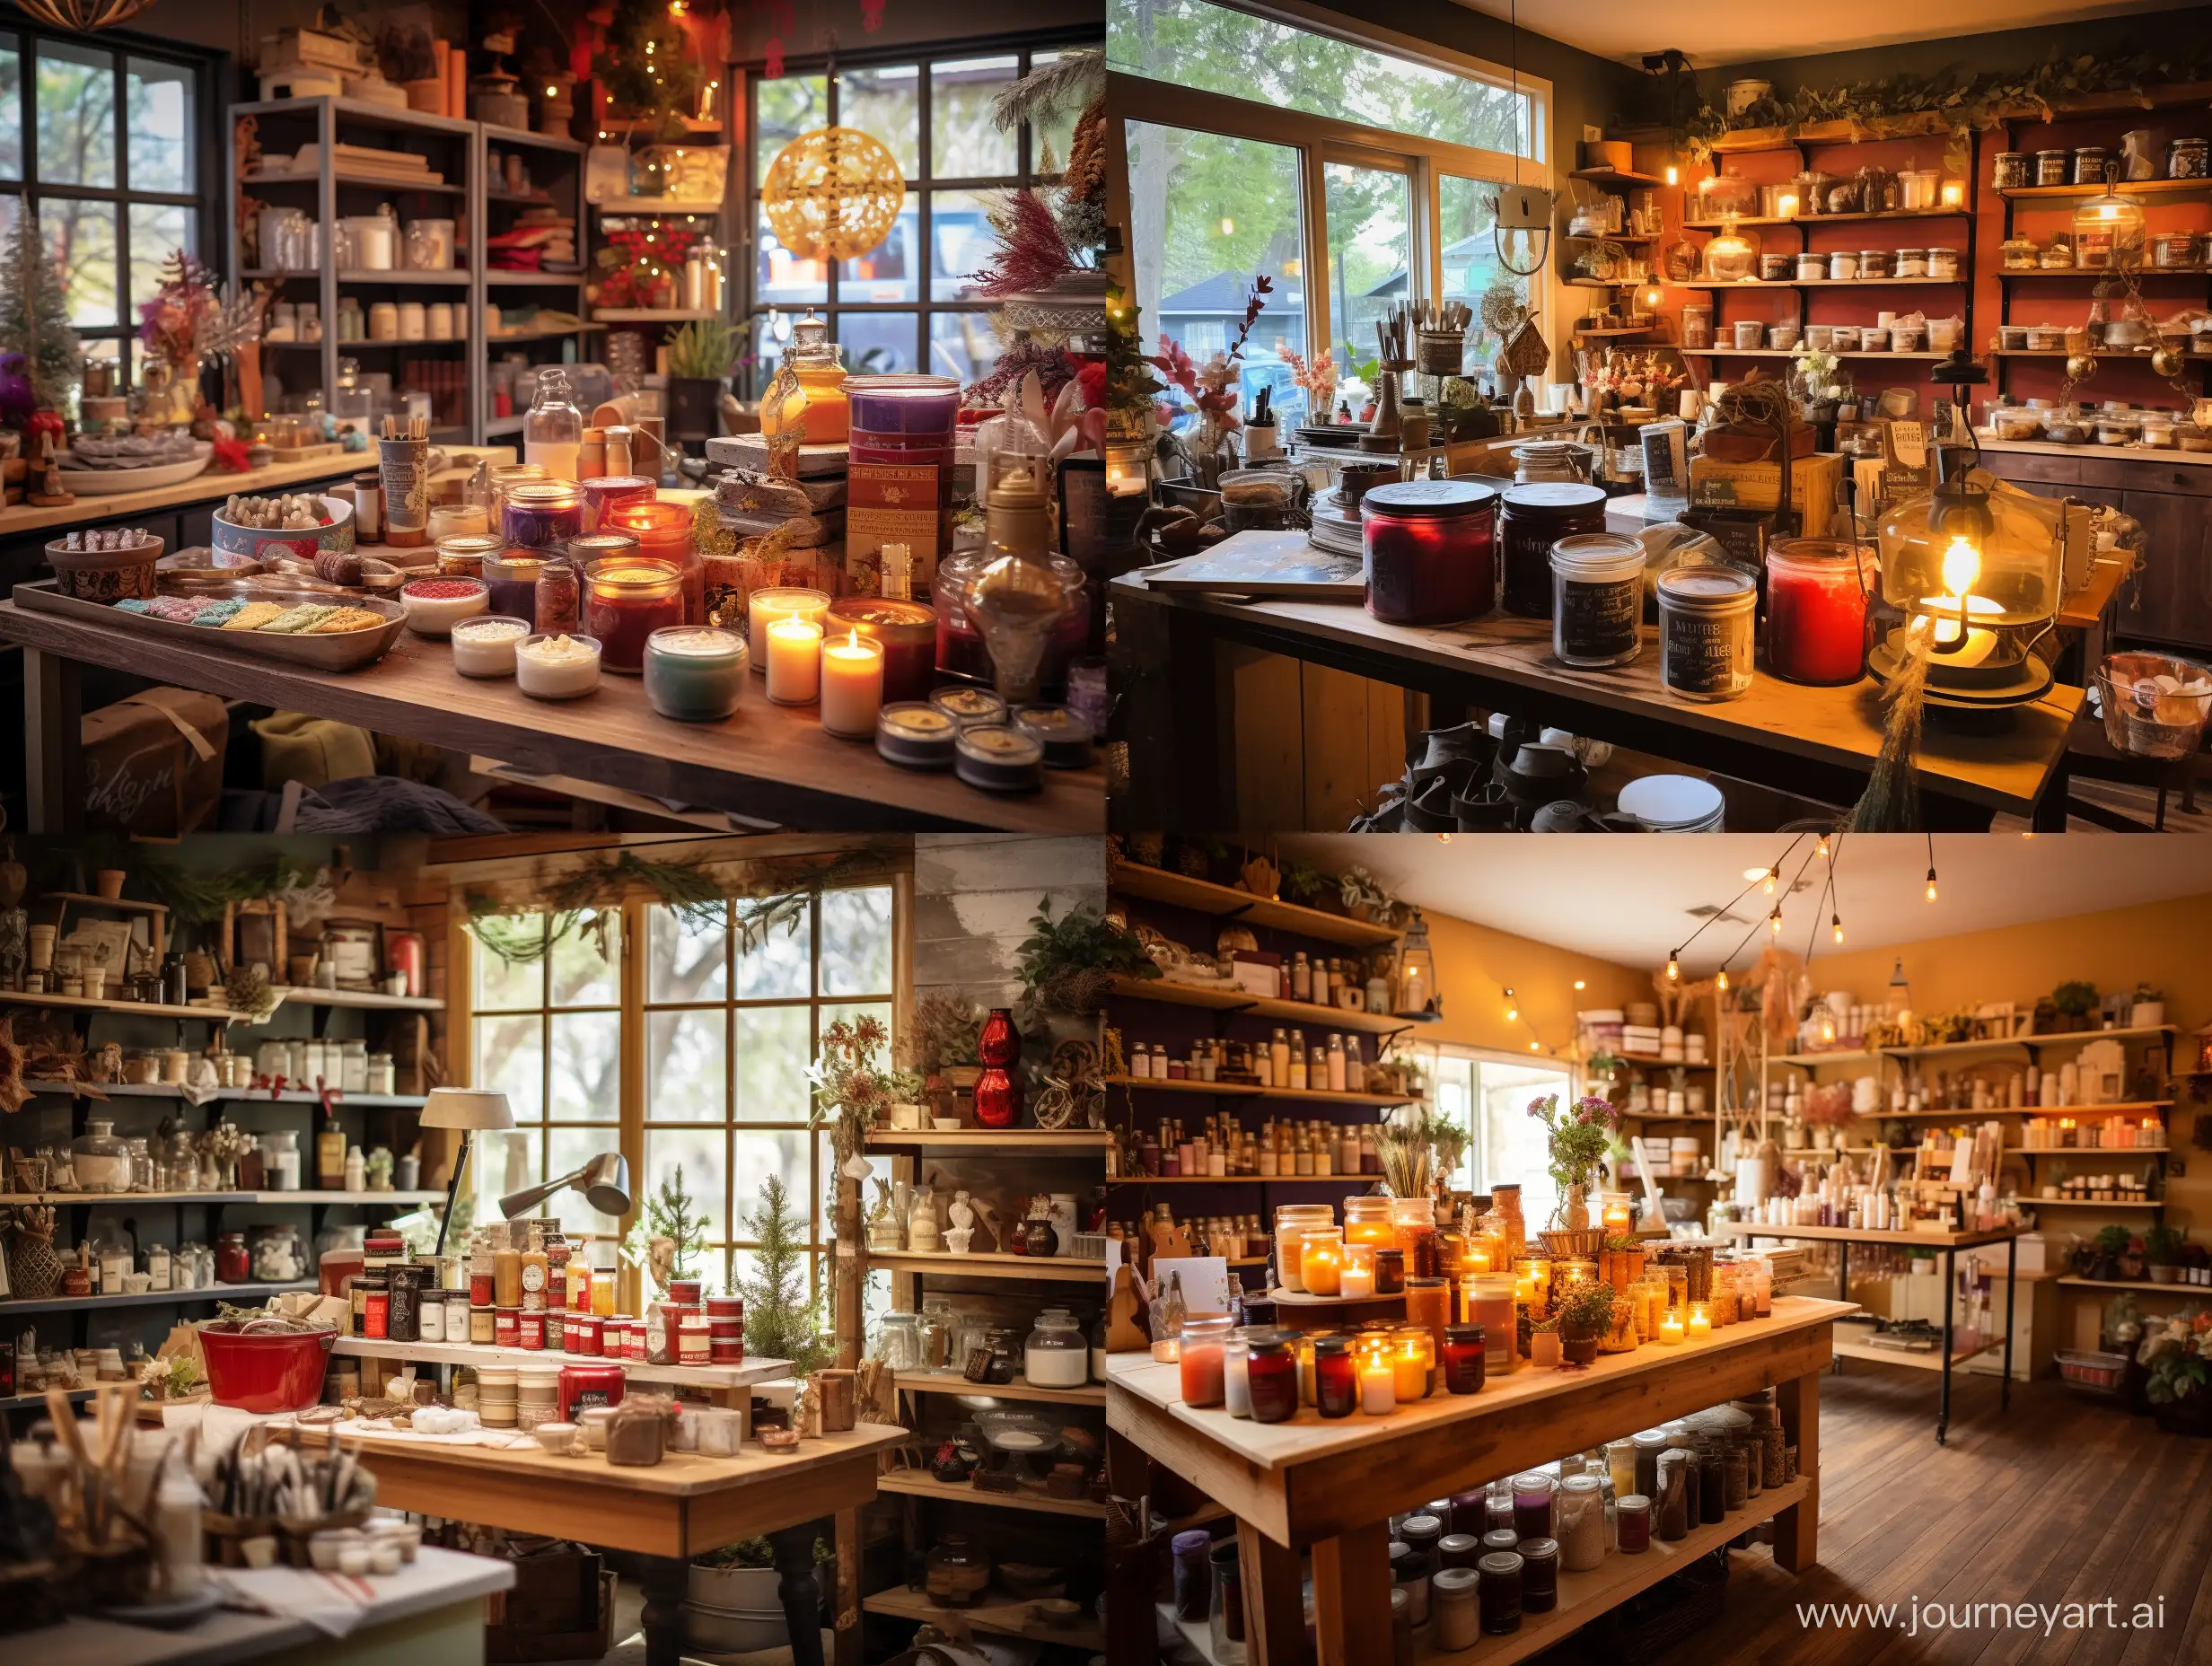 Artisan-Workshop-Festive-Candle-and-Soap-Making-in-a-Cozy-Ambiance